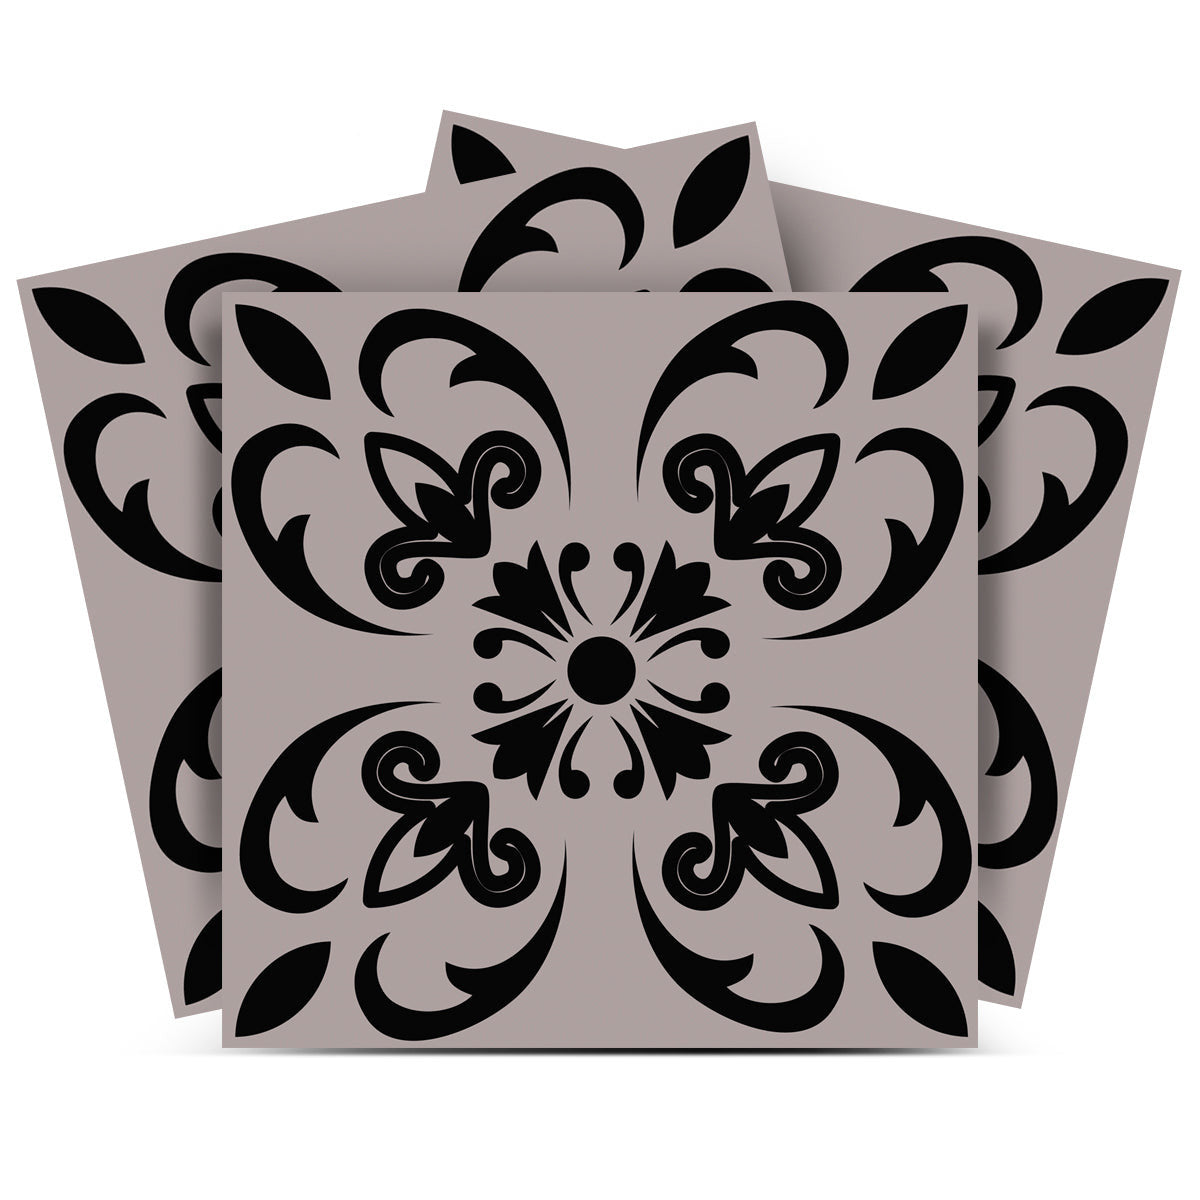 4" X 4" Black And White Orchid Peel And Stick Removable Tiles